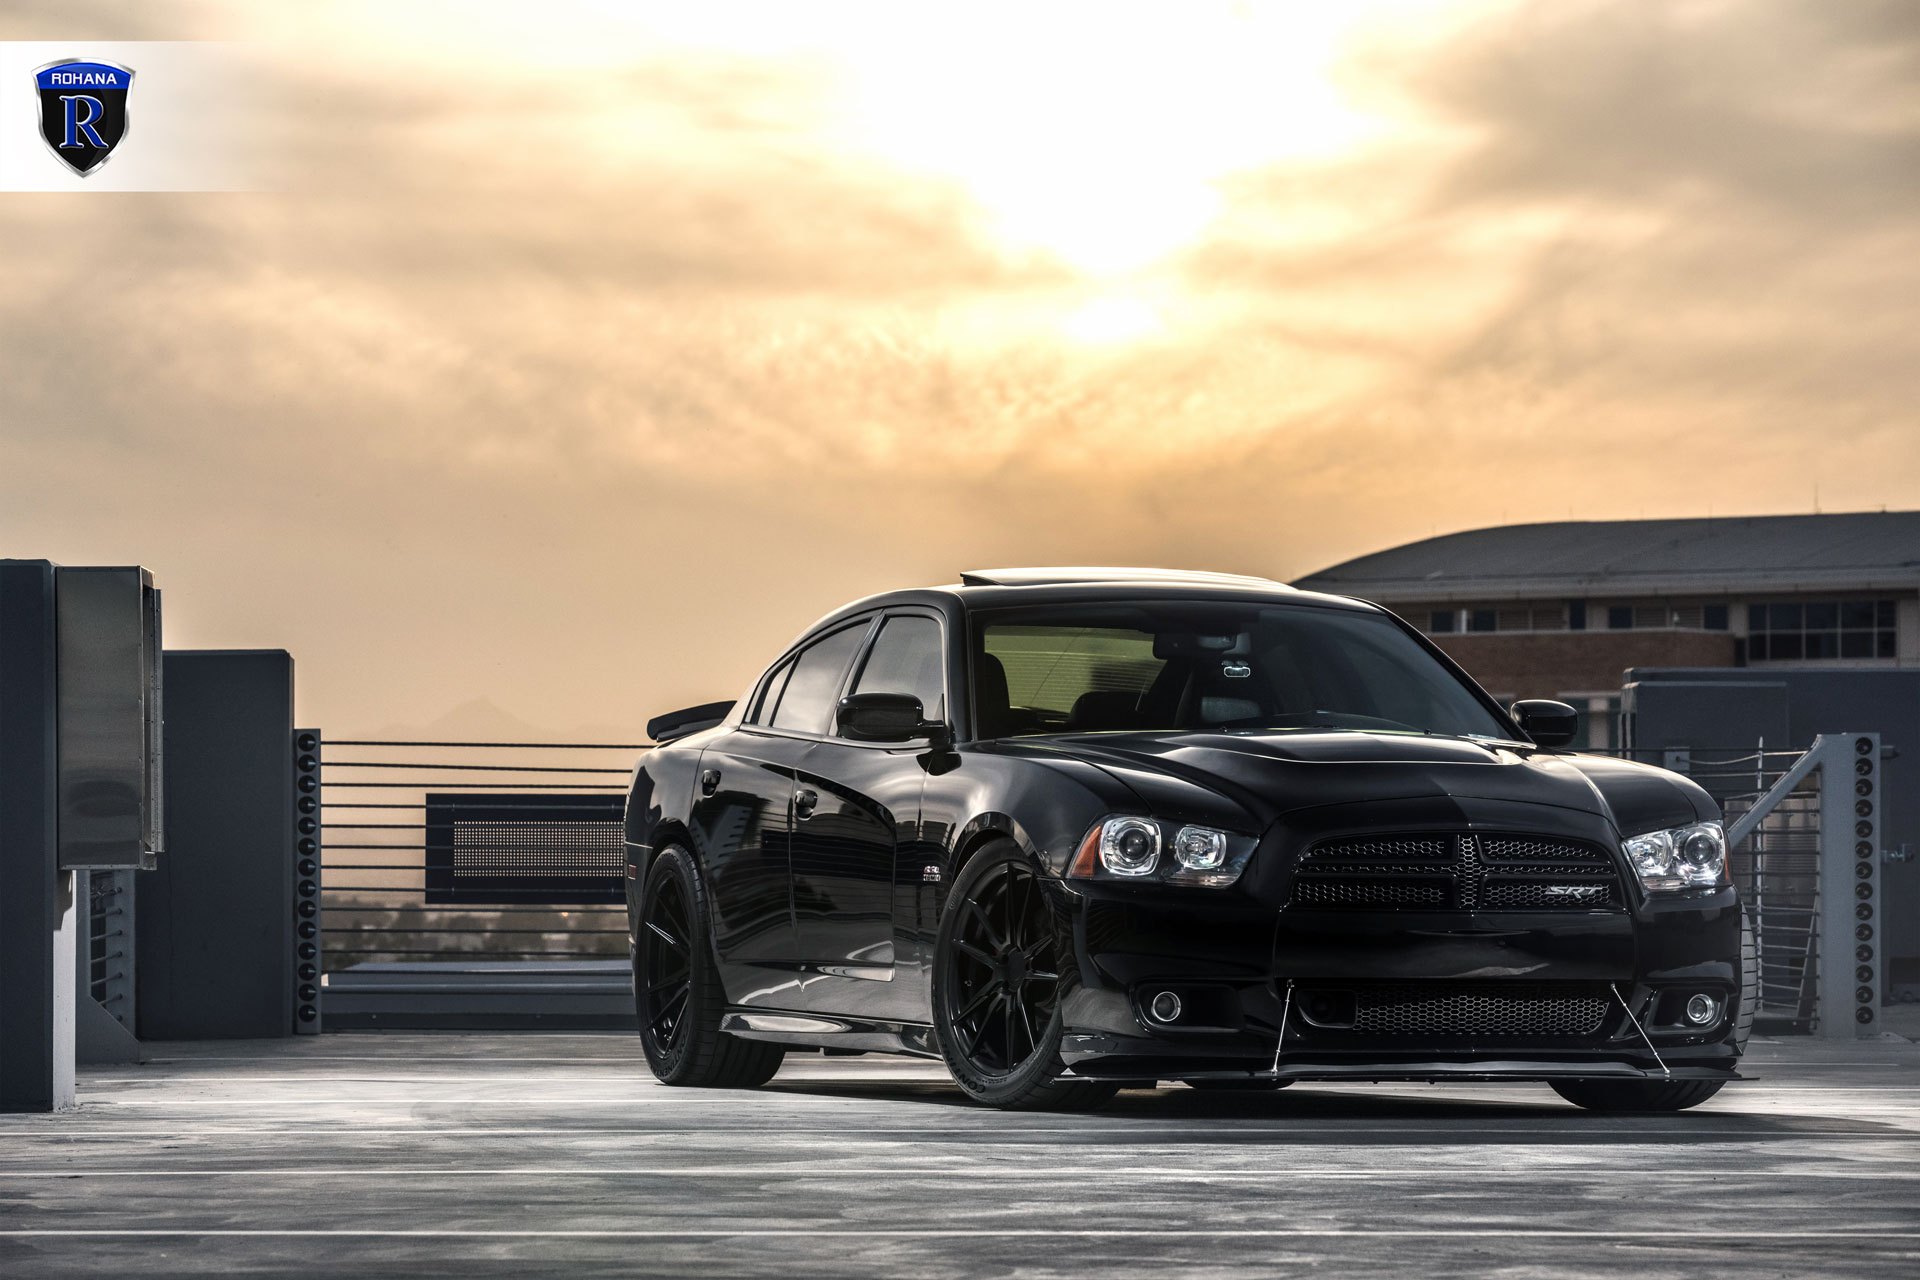 Black Dodge Charger SRT with Custom Mesh Grille - Photo by Rohana Wheels.